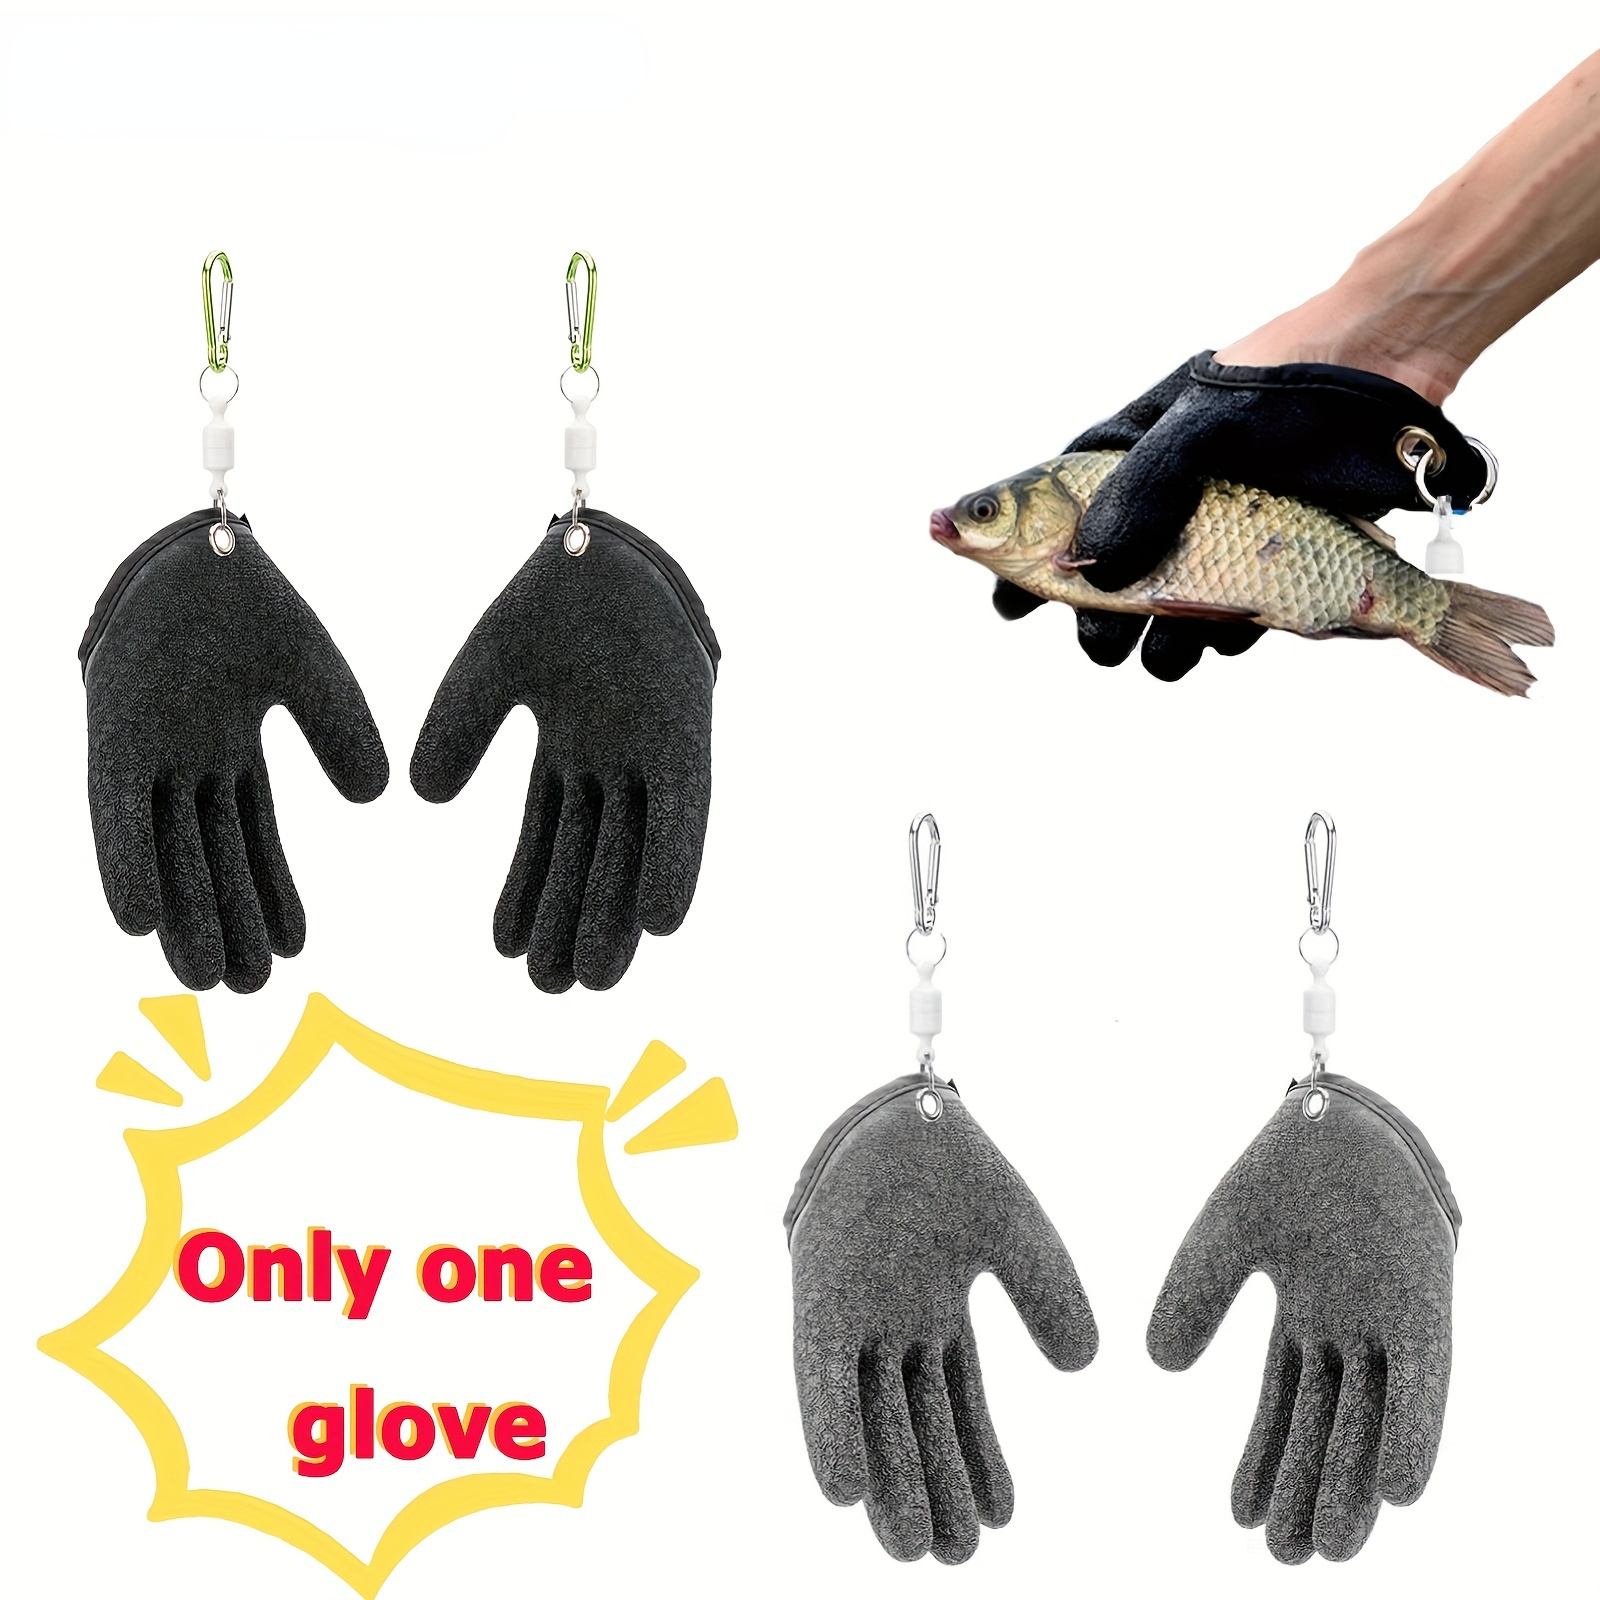 1pc Non Slip Waterproof Fishing Catching Gloves With Magnetic